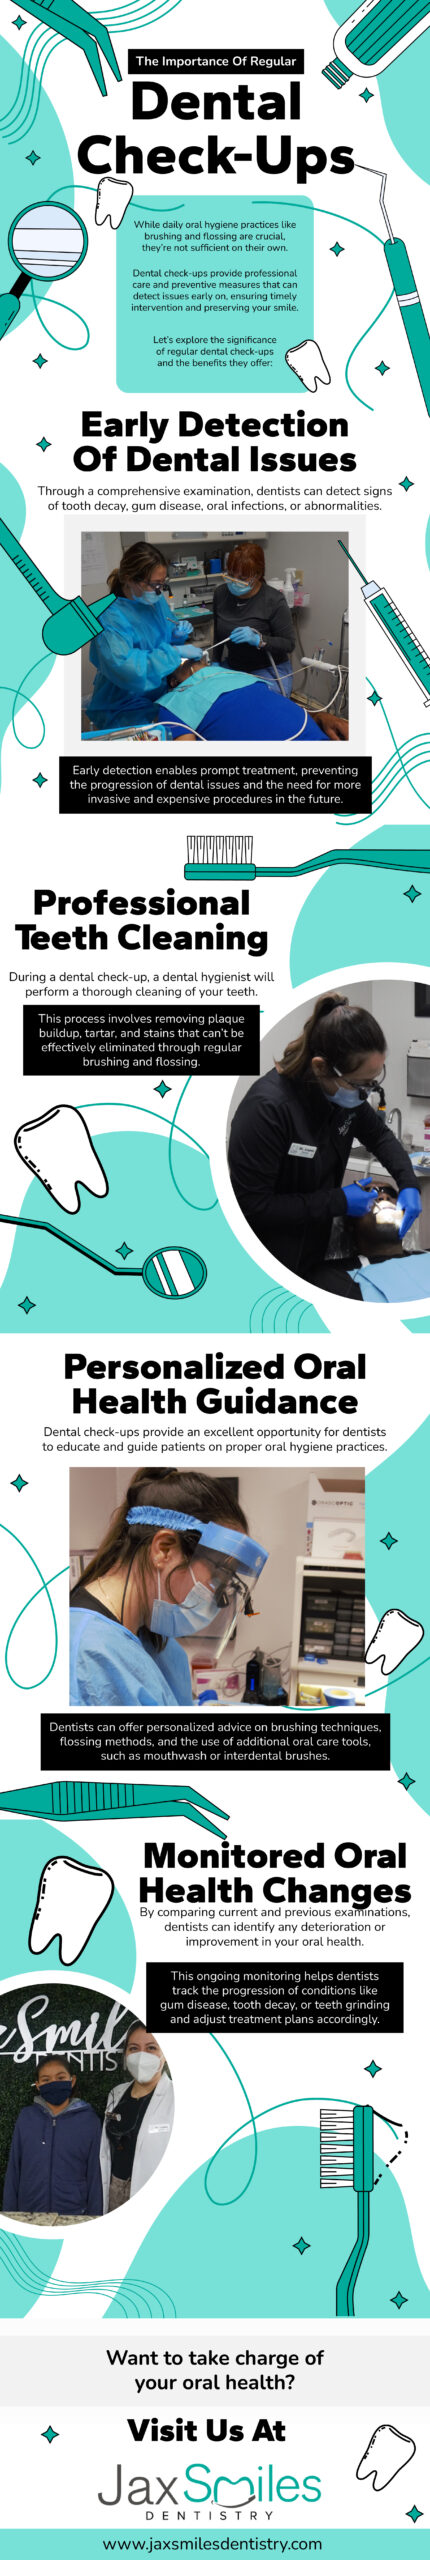 The Importance Of Regular Dental Check-Ups-INFOGRAPHIC